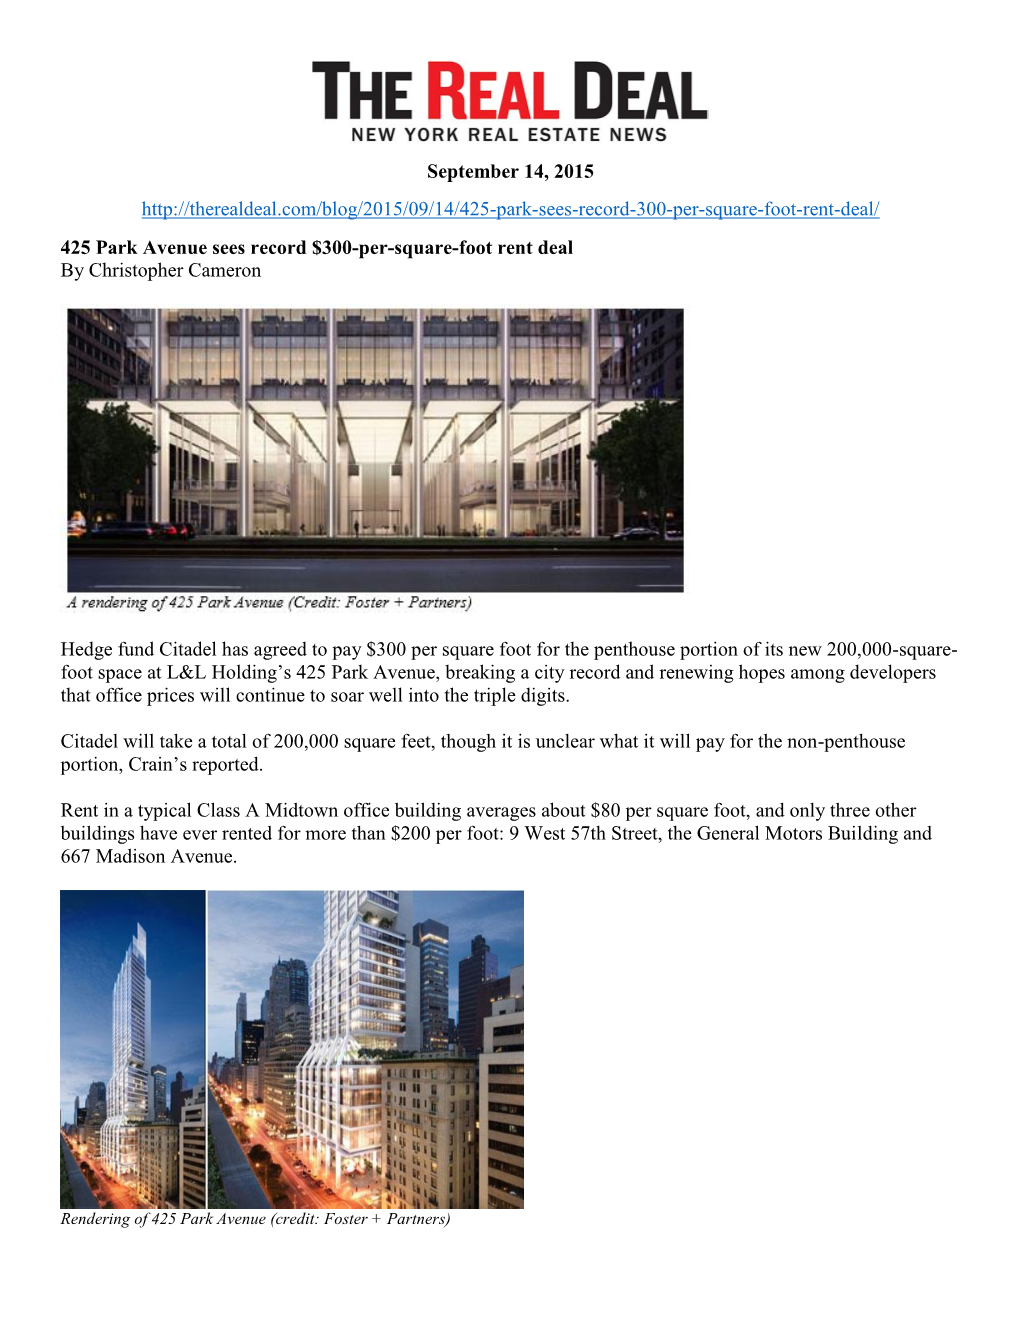 Sept. 14, 2015 the REAL DEAL 425 Park Avenue Sees Record $300